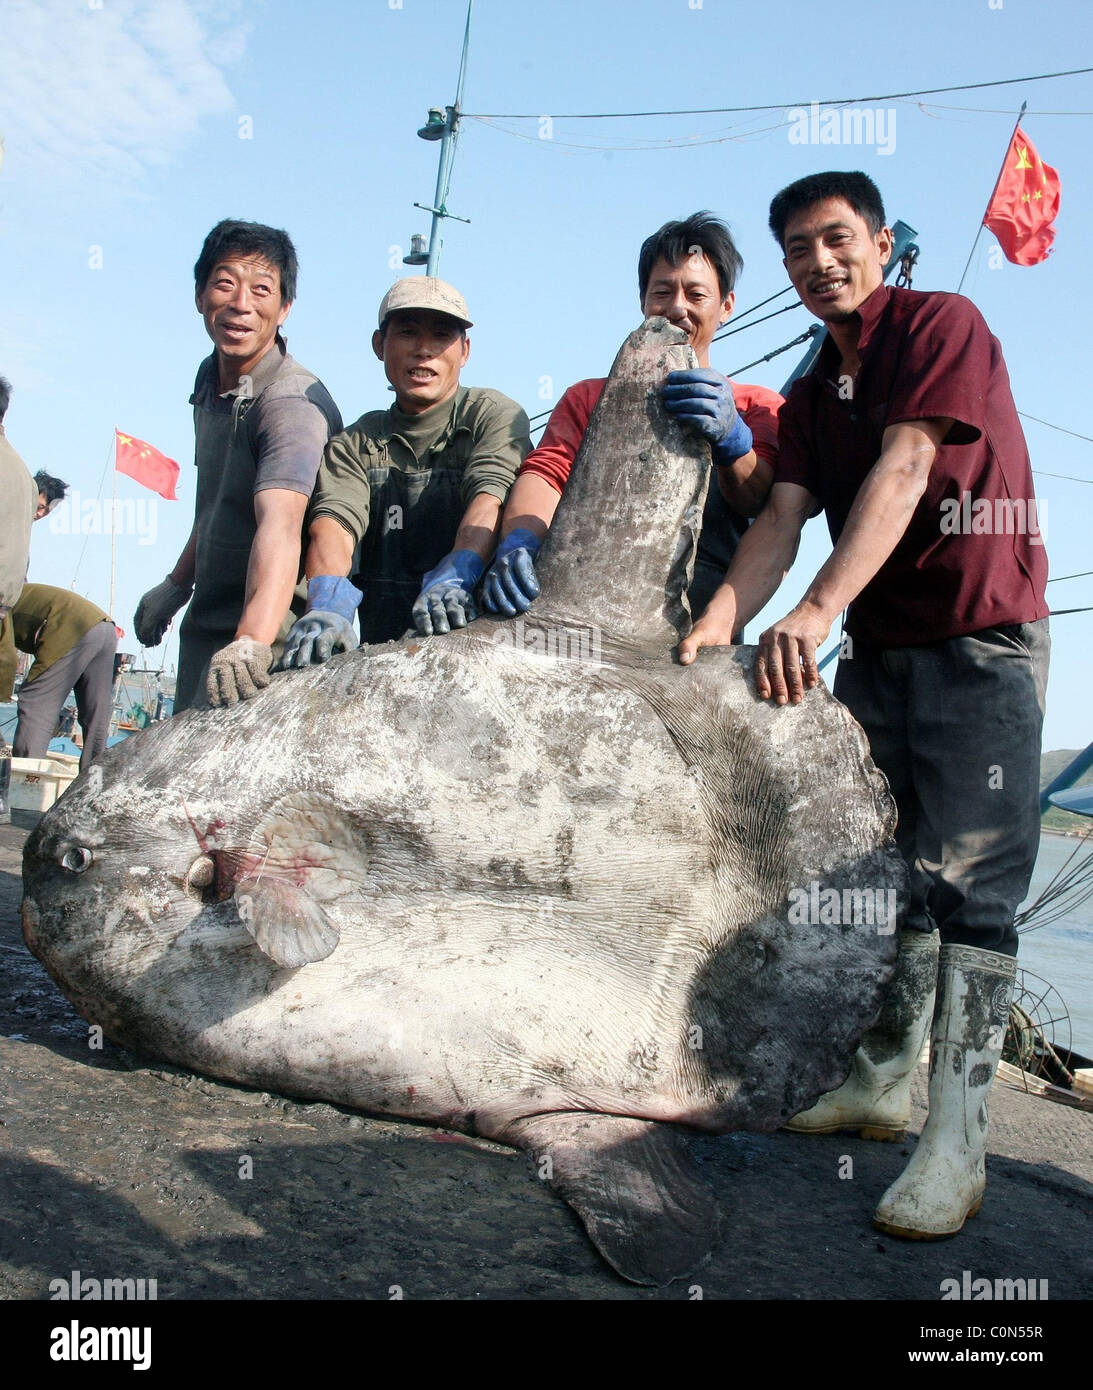 BIG FISH IS PRIZE CATCH What a whopper! Fishermen off the coast of